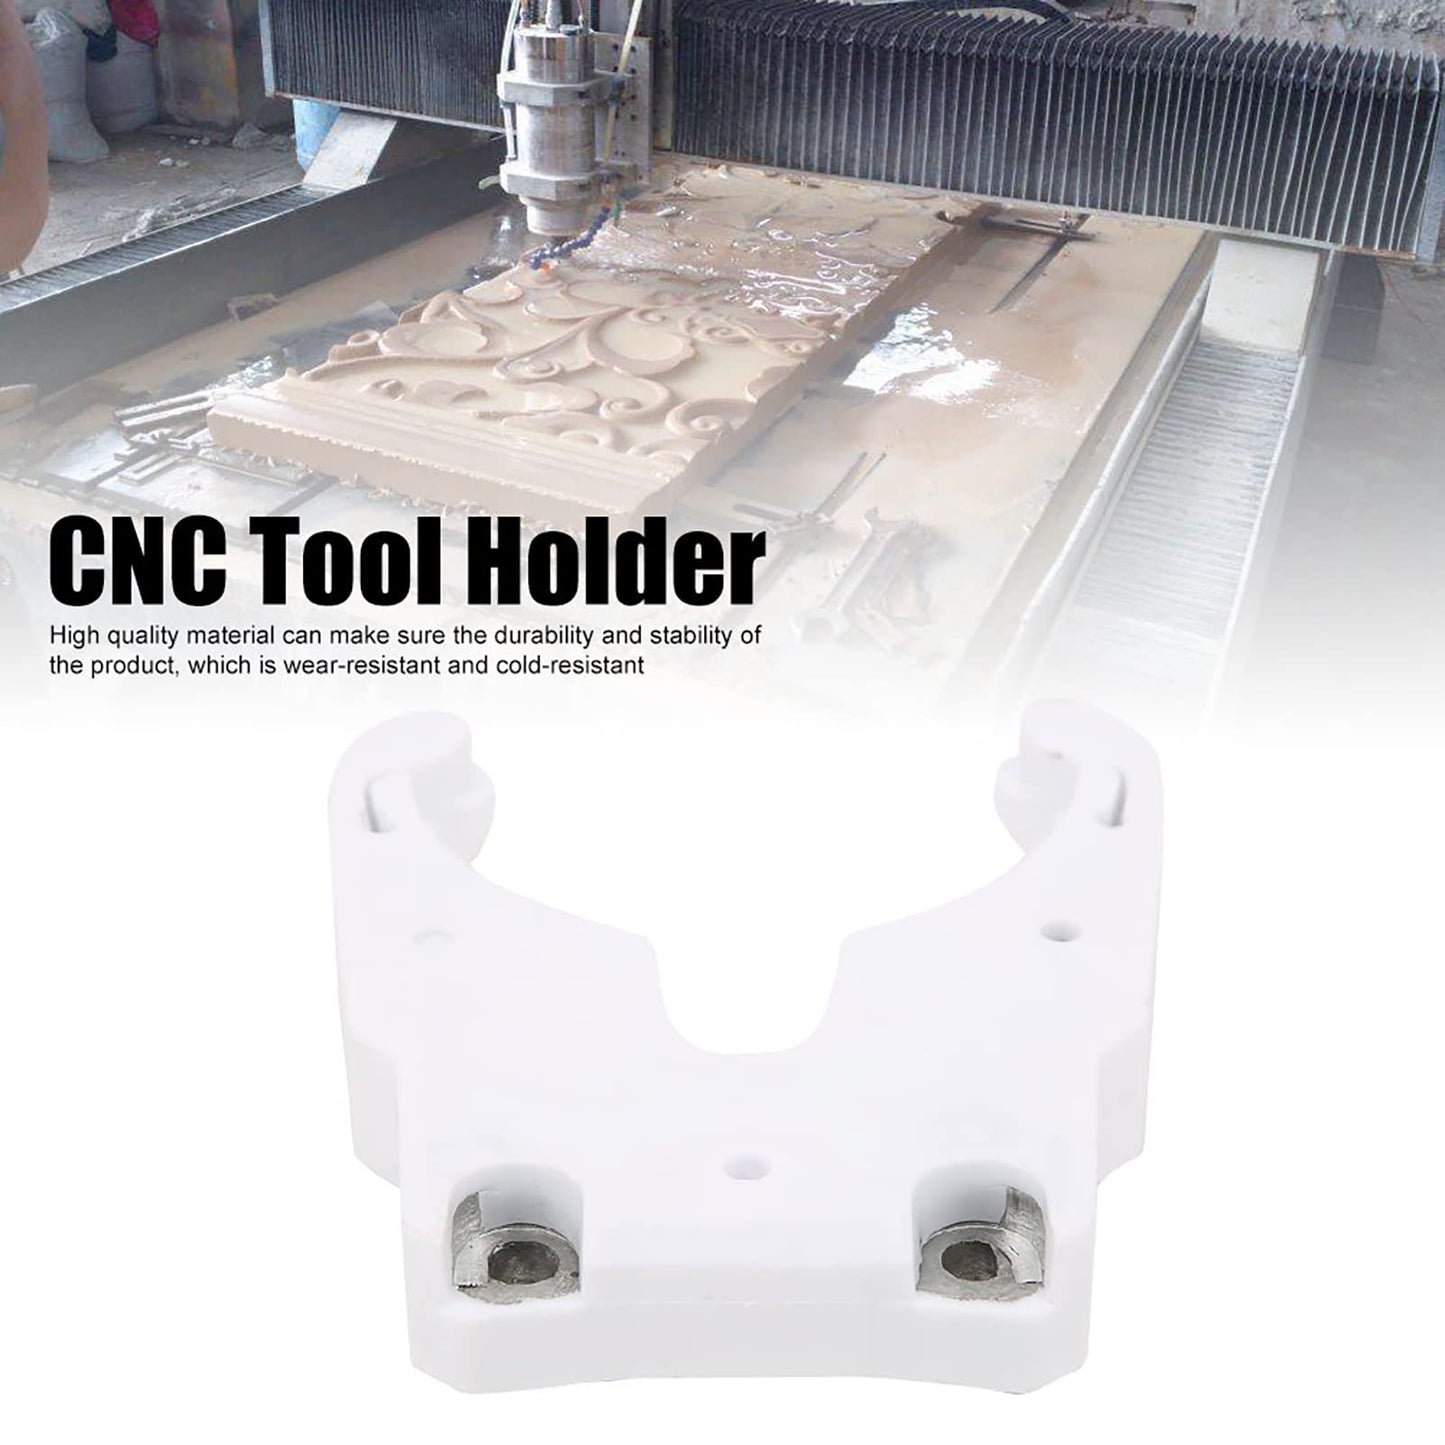 HSK63F Tool Holder Clamp, Temperature Resistant, Strong and Durable, Cradle Fork Claw High Accuracy Automatic Tool Changer for Engraving Machine